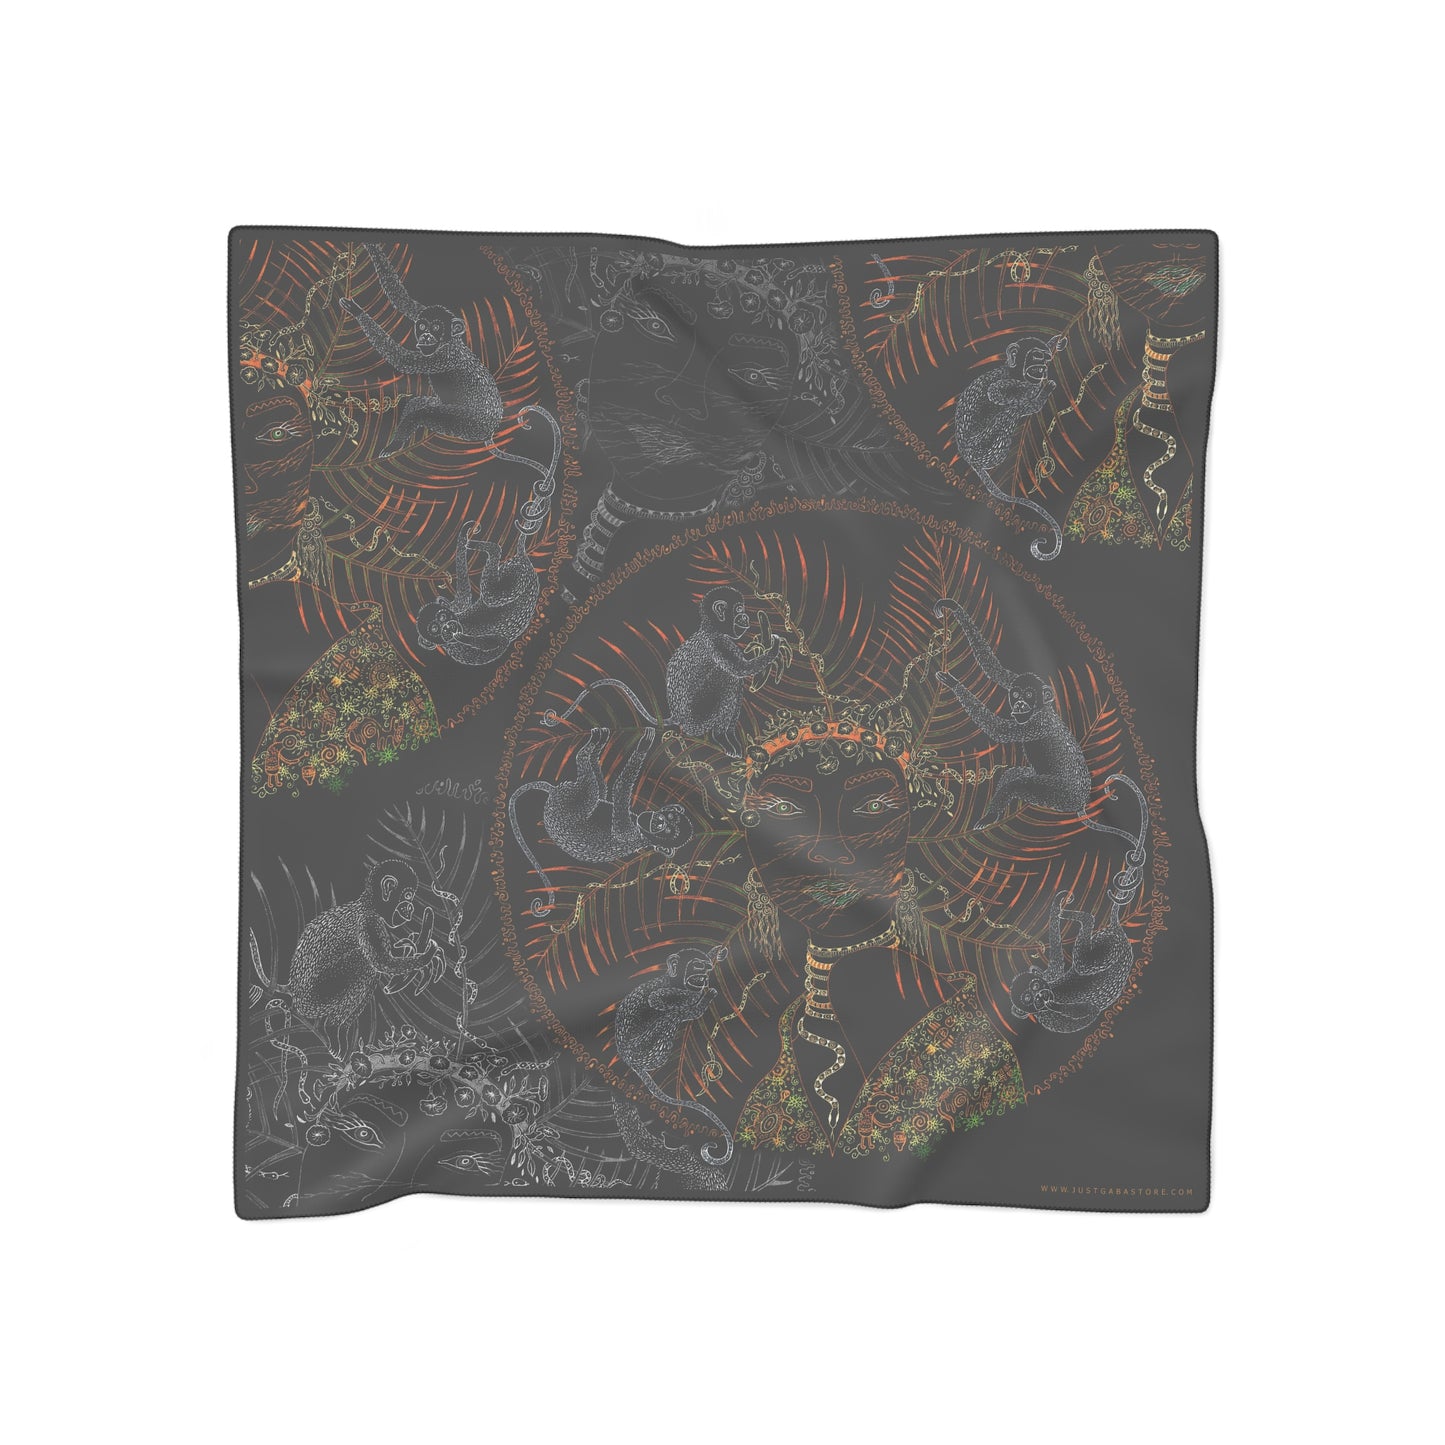 Chinese Years Zodiac Sign Poly Scarf (Monkey)